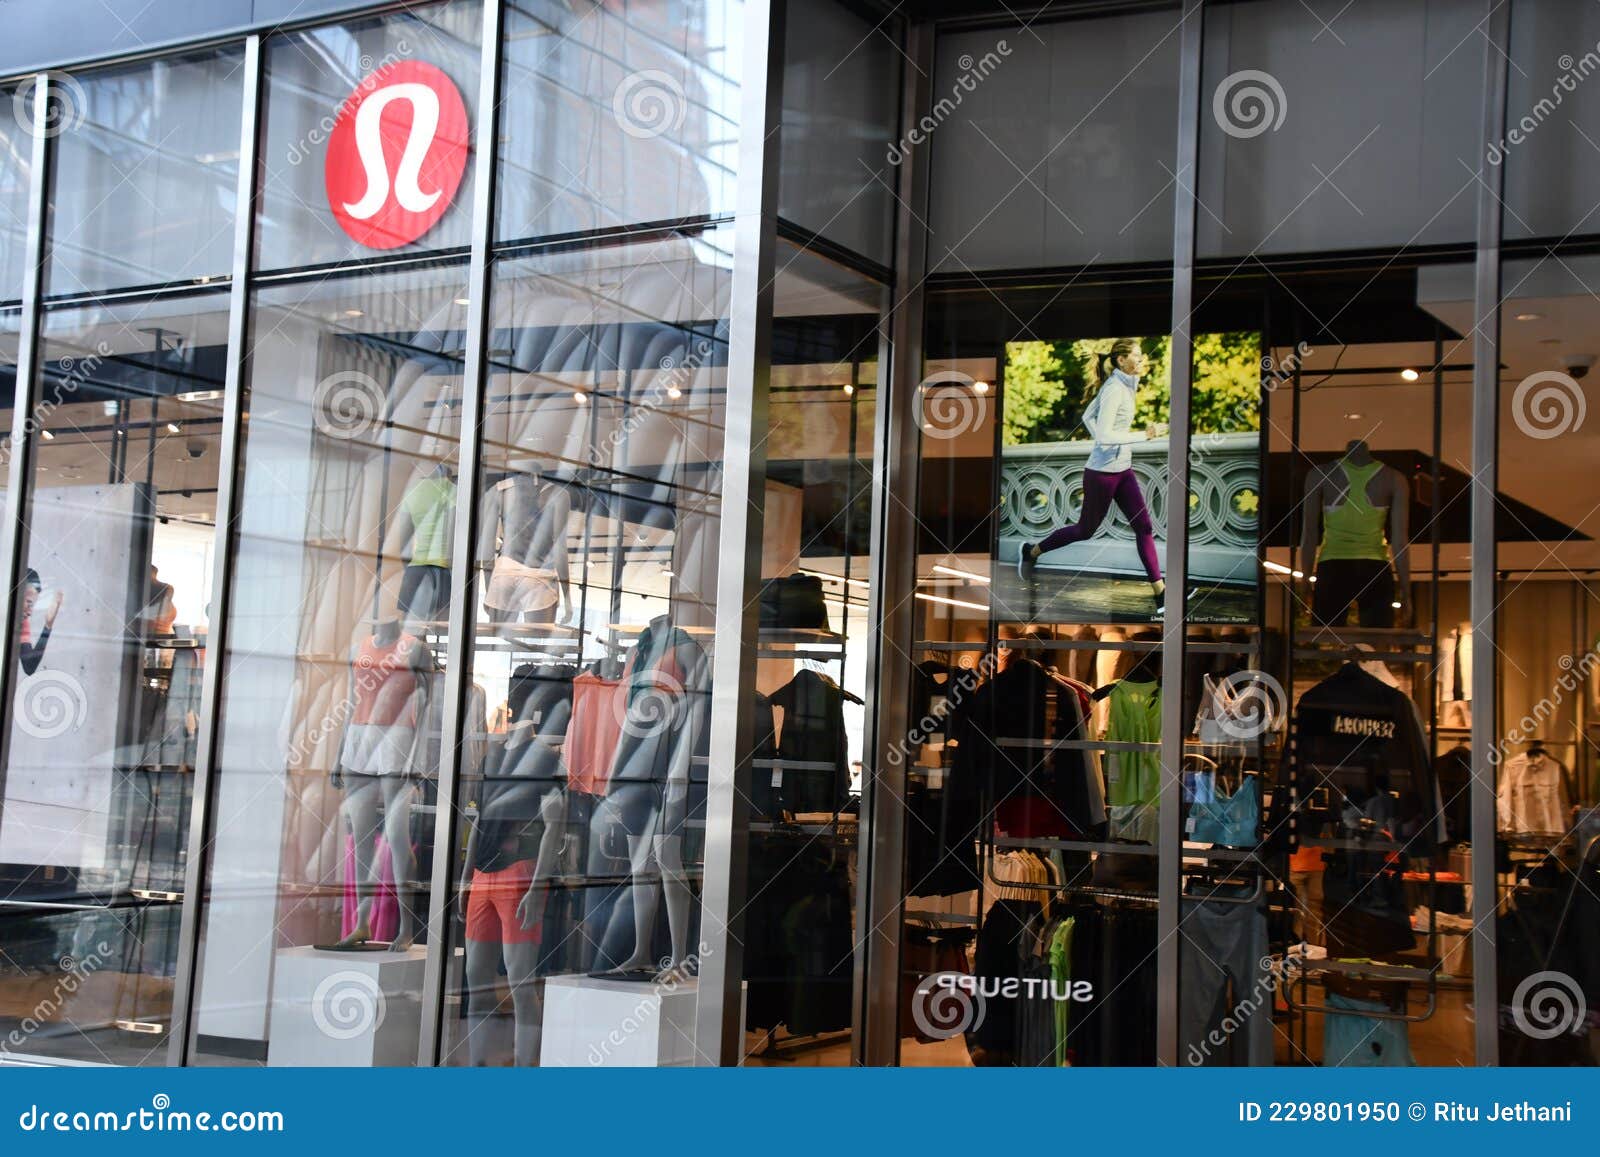 Lululemon Store at the Shops and Restaurants at Hudson Yards in Manhattan,  New York City Editorial Image - Image of density, chelsea: 229801950